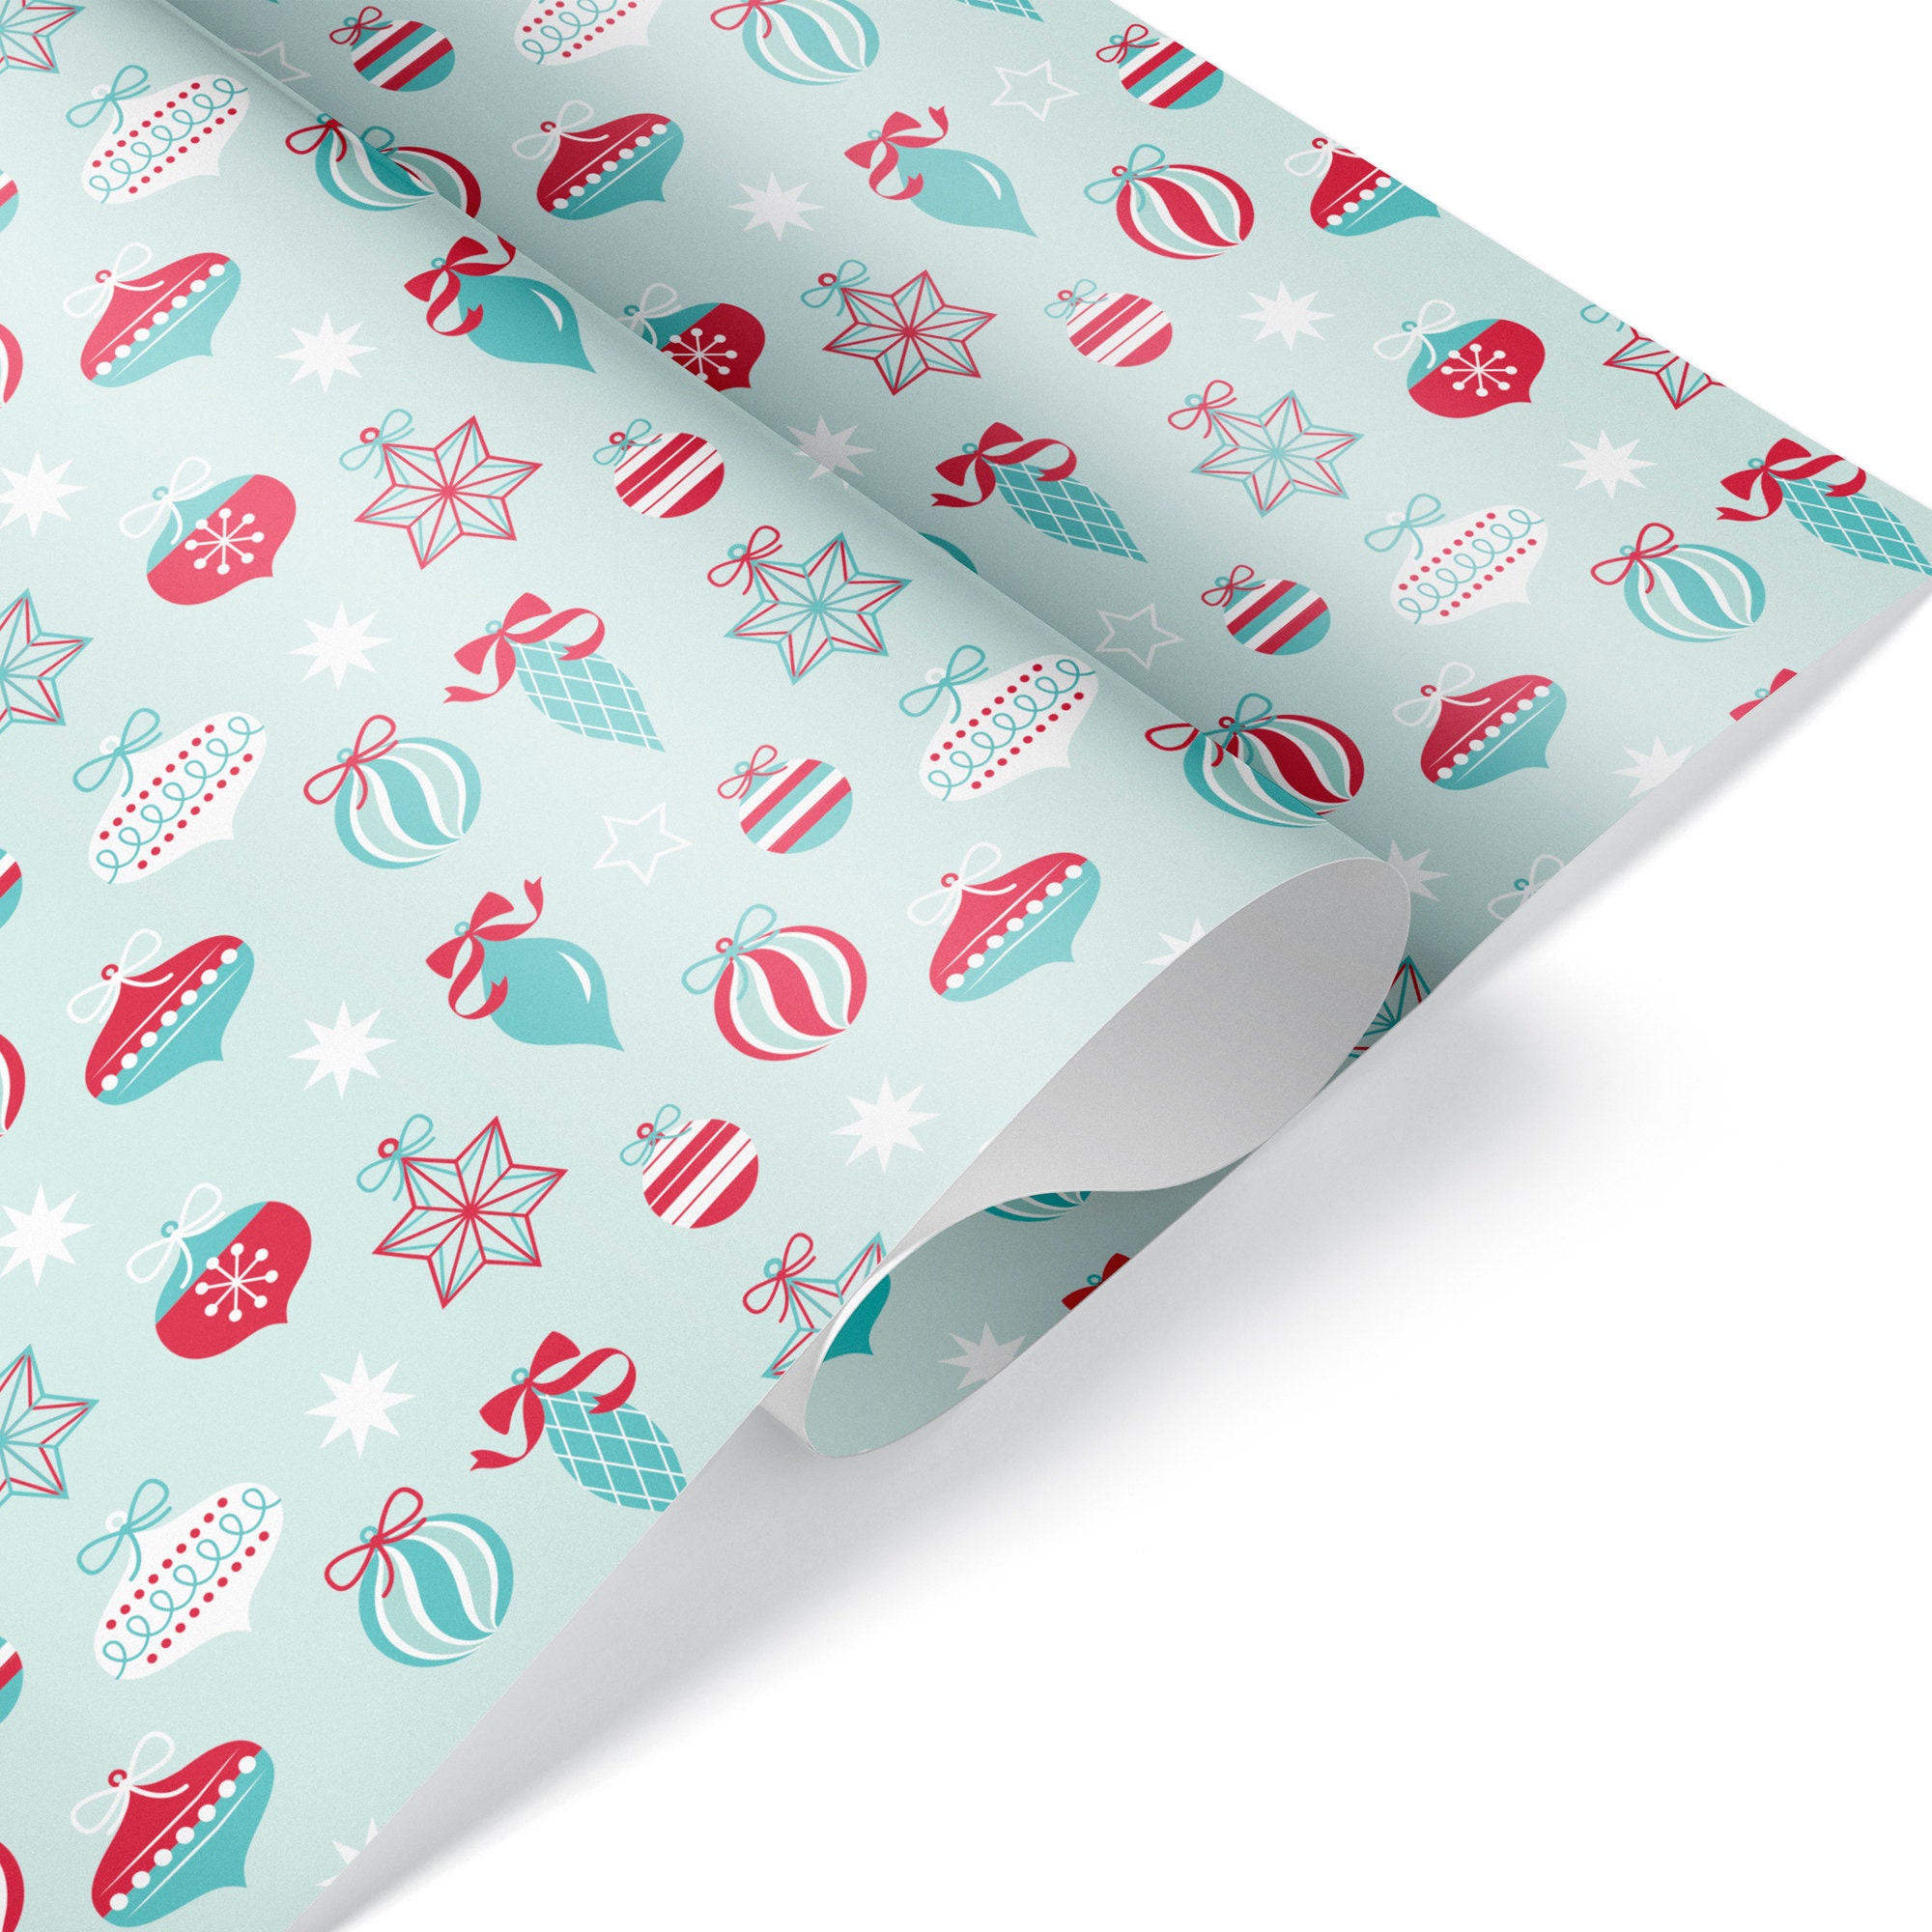 Cute Colorful Retro Christmas Ornament Thick Wrapping Paper, Xmas Winter  Holiday, Pink Celebration Theme (12 foot x 30 inch roll)